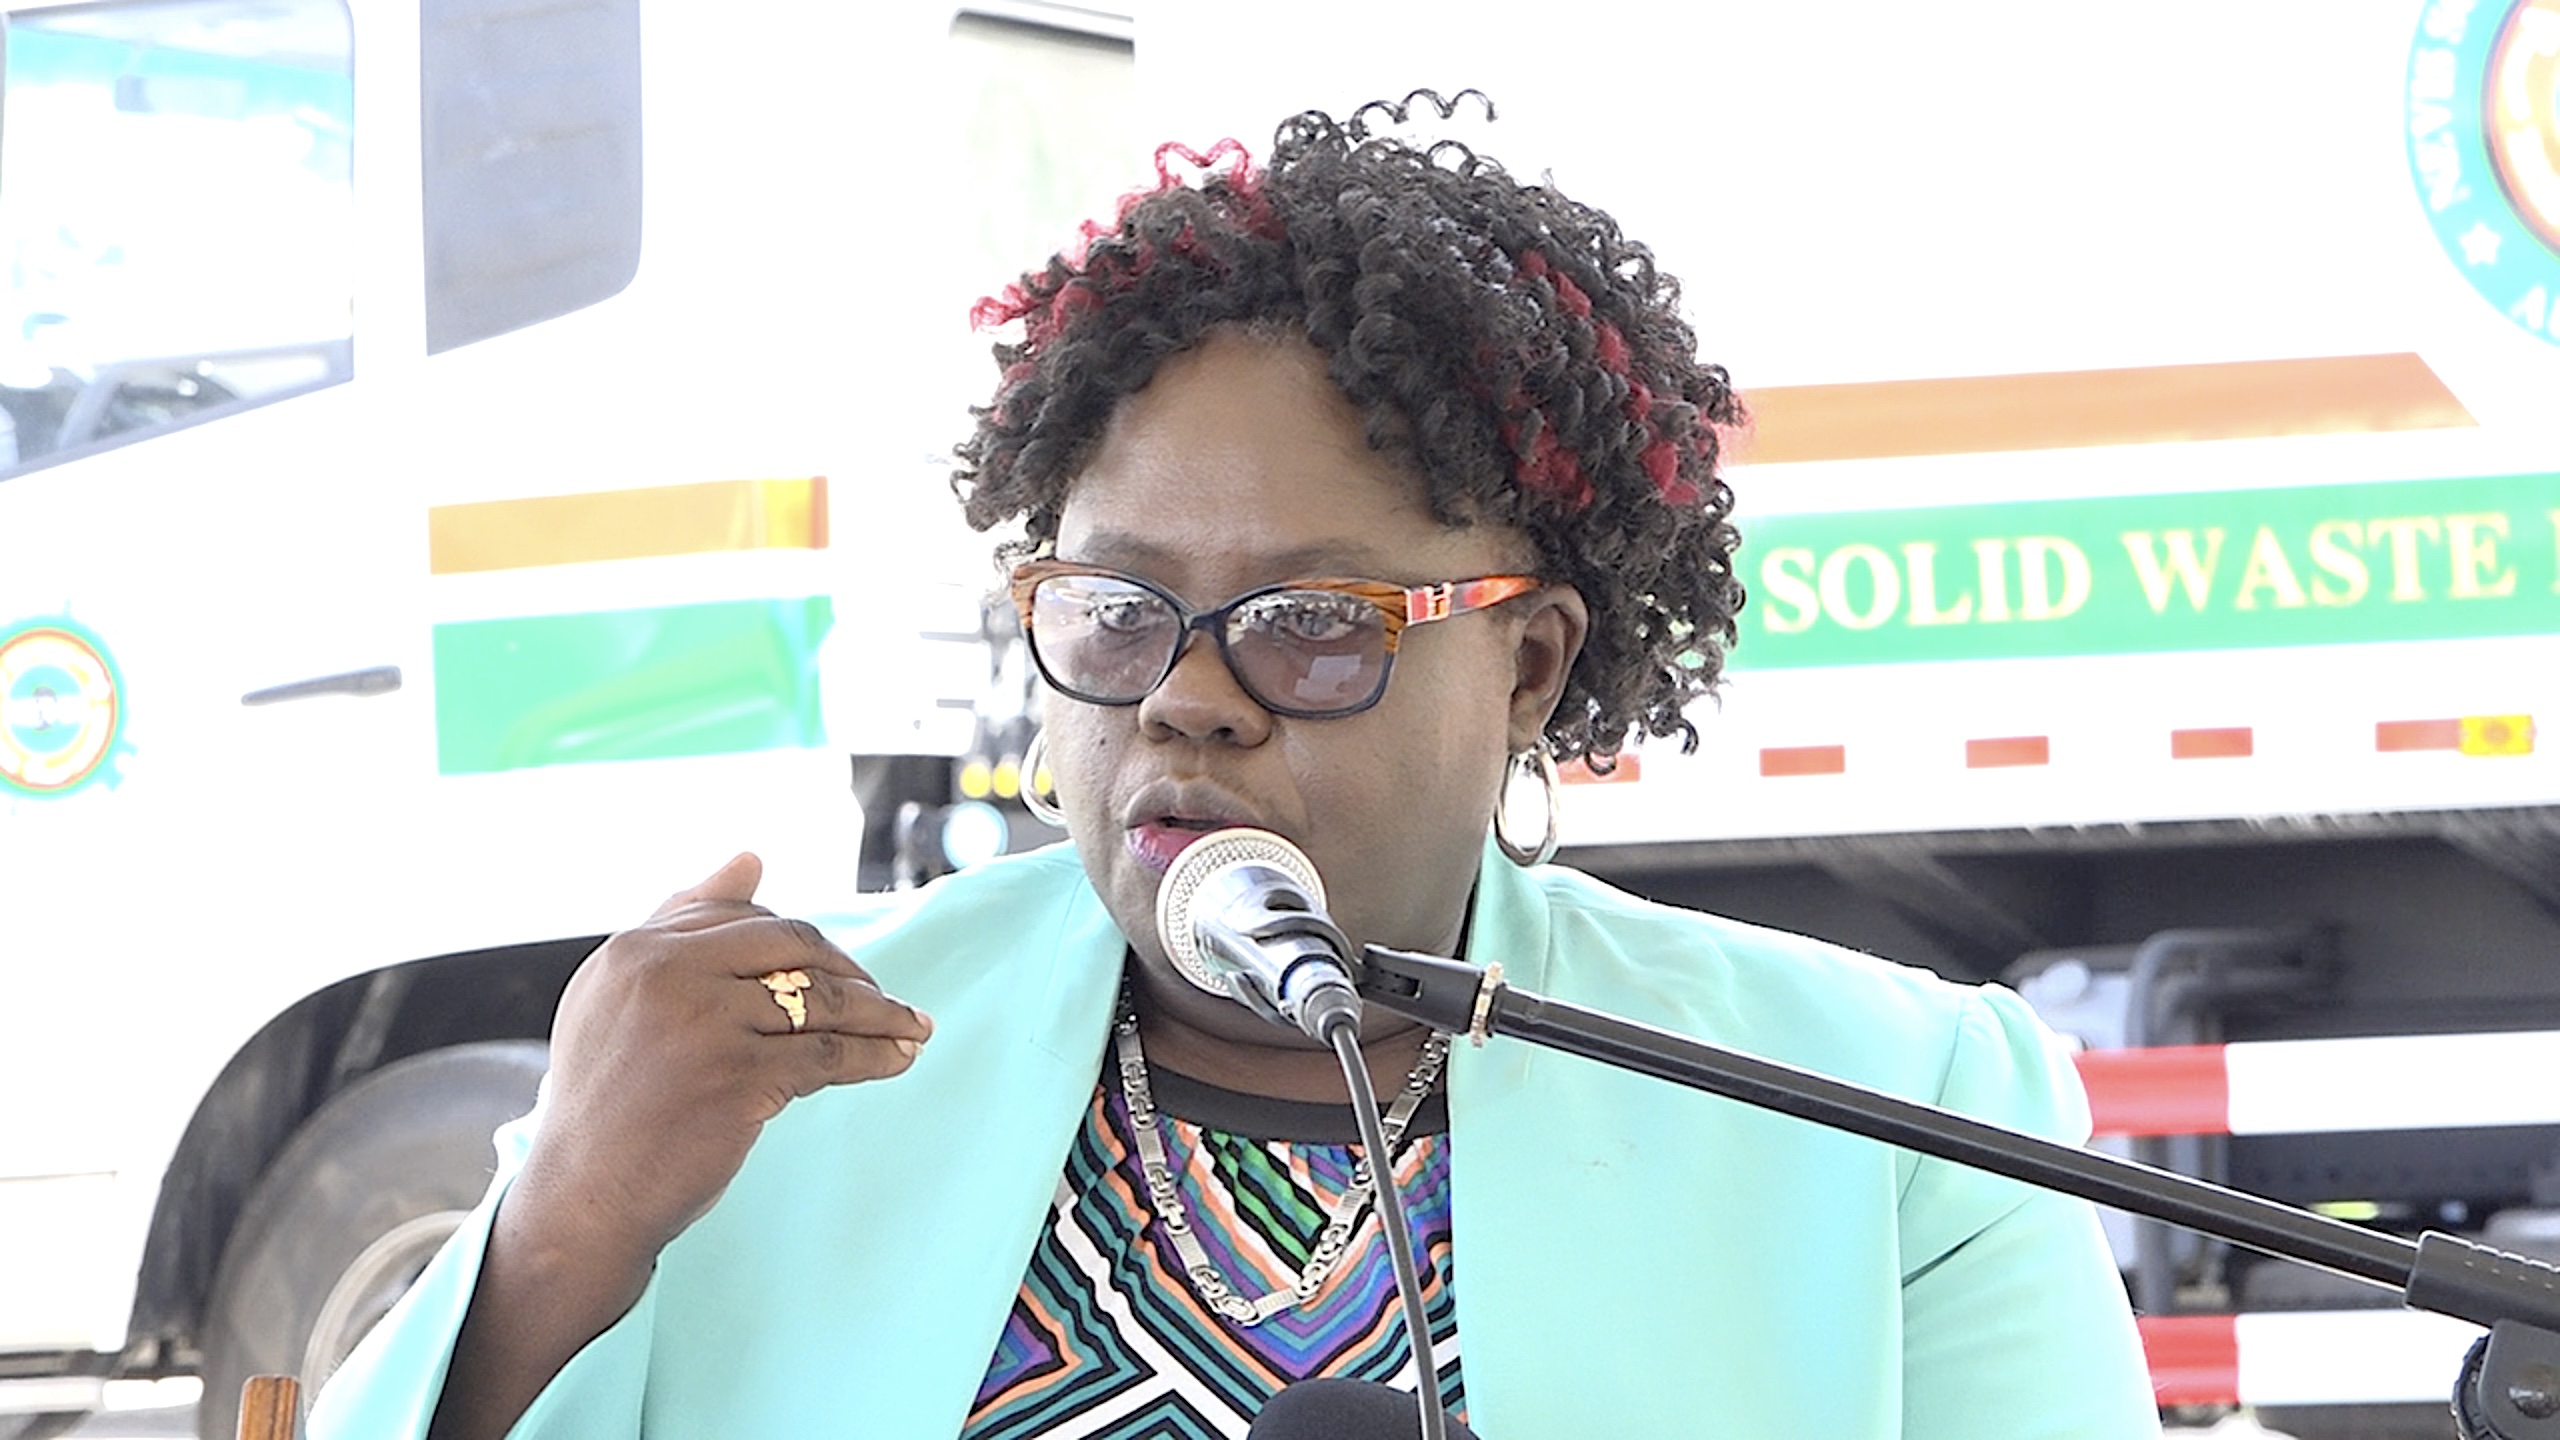 Hon. Hazel Brandy-Williams, Junior Minister of Health and Gender Affairs in the Nevis Island Administration, delivering remarks at the official handing over ceremony of four pieces of new equipment from the Nevis Island Administration on September 08, 2022, for use at the Nevis Solid Waste Management Authority’s landfill at Long Point